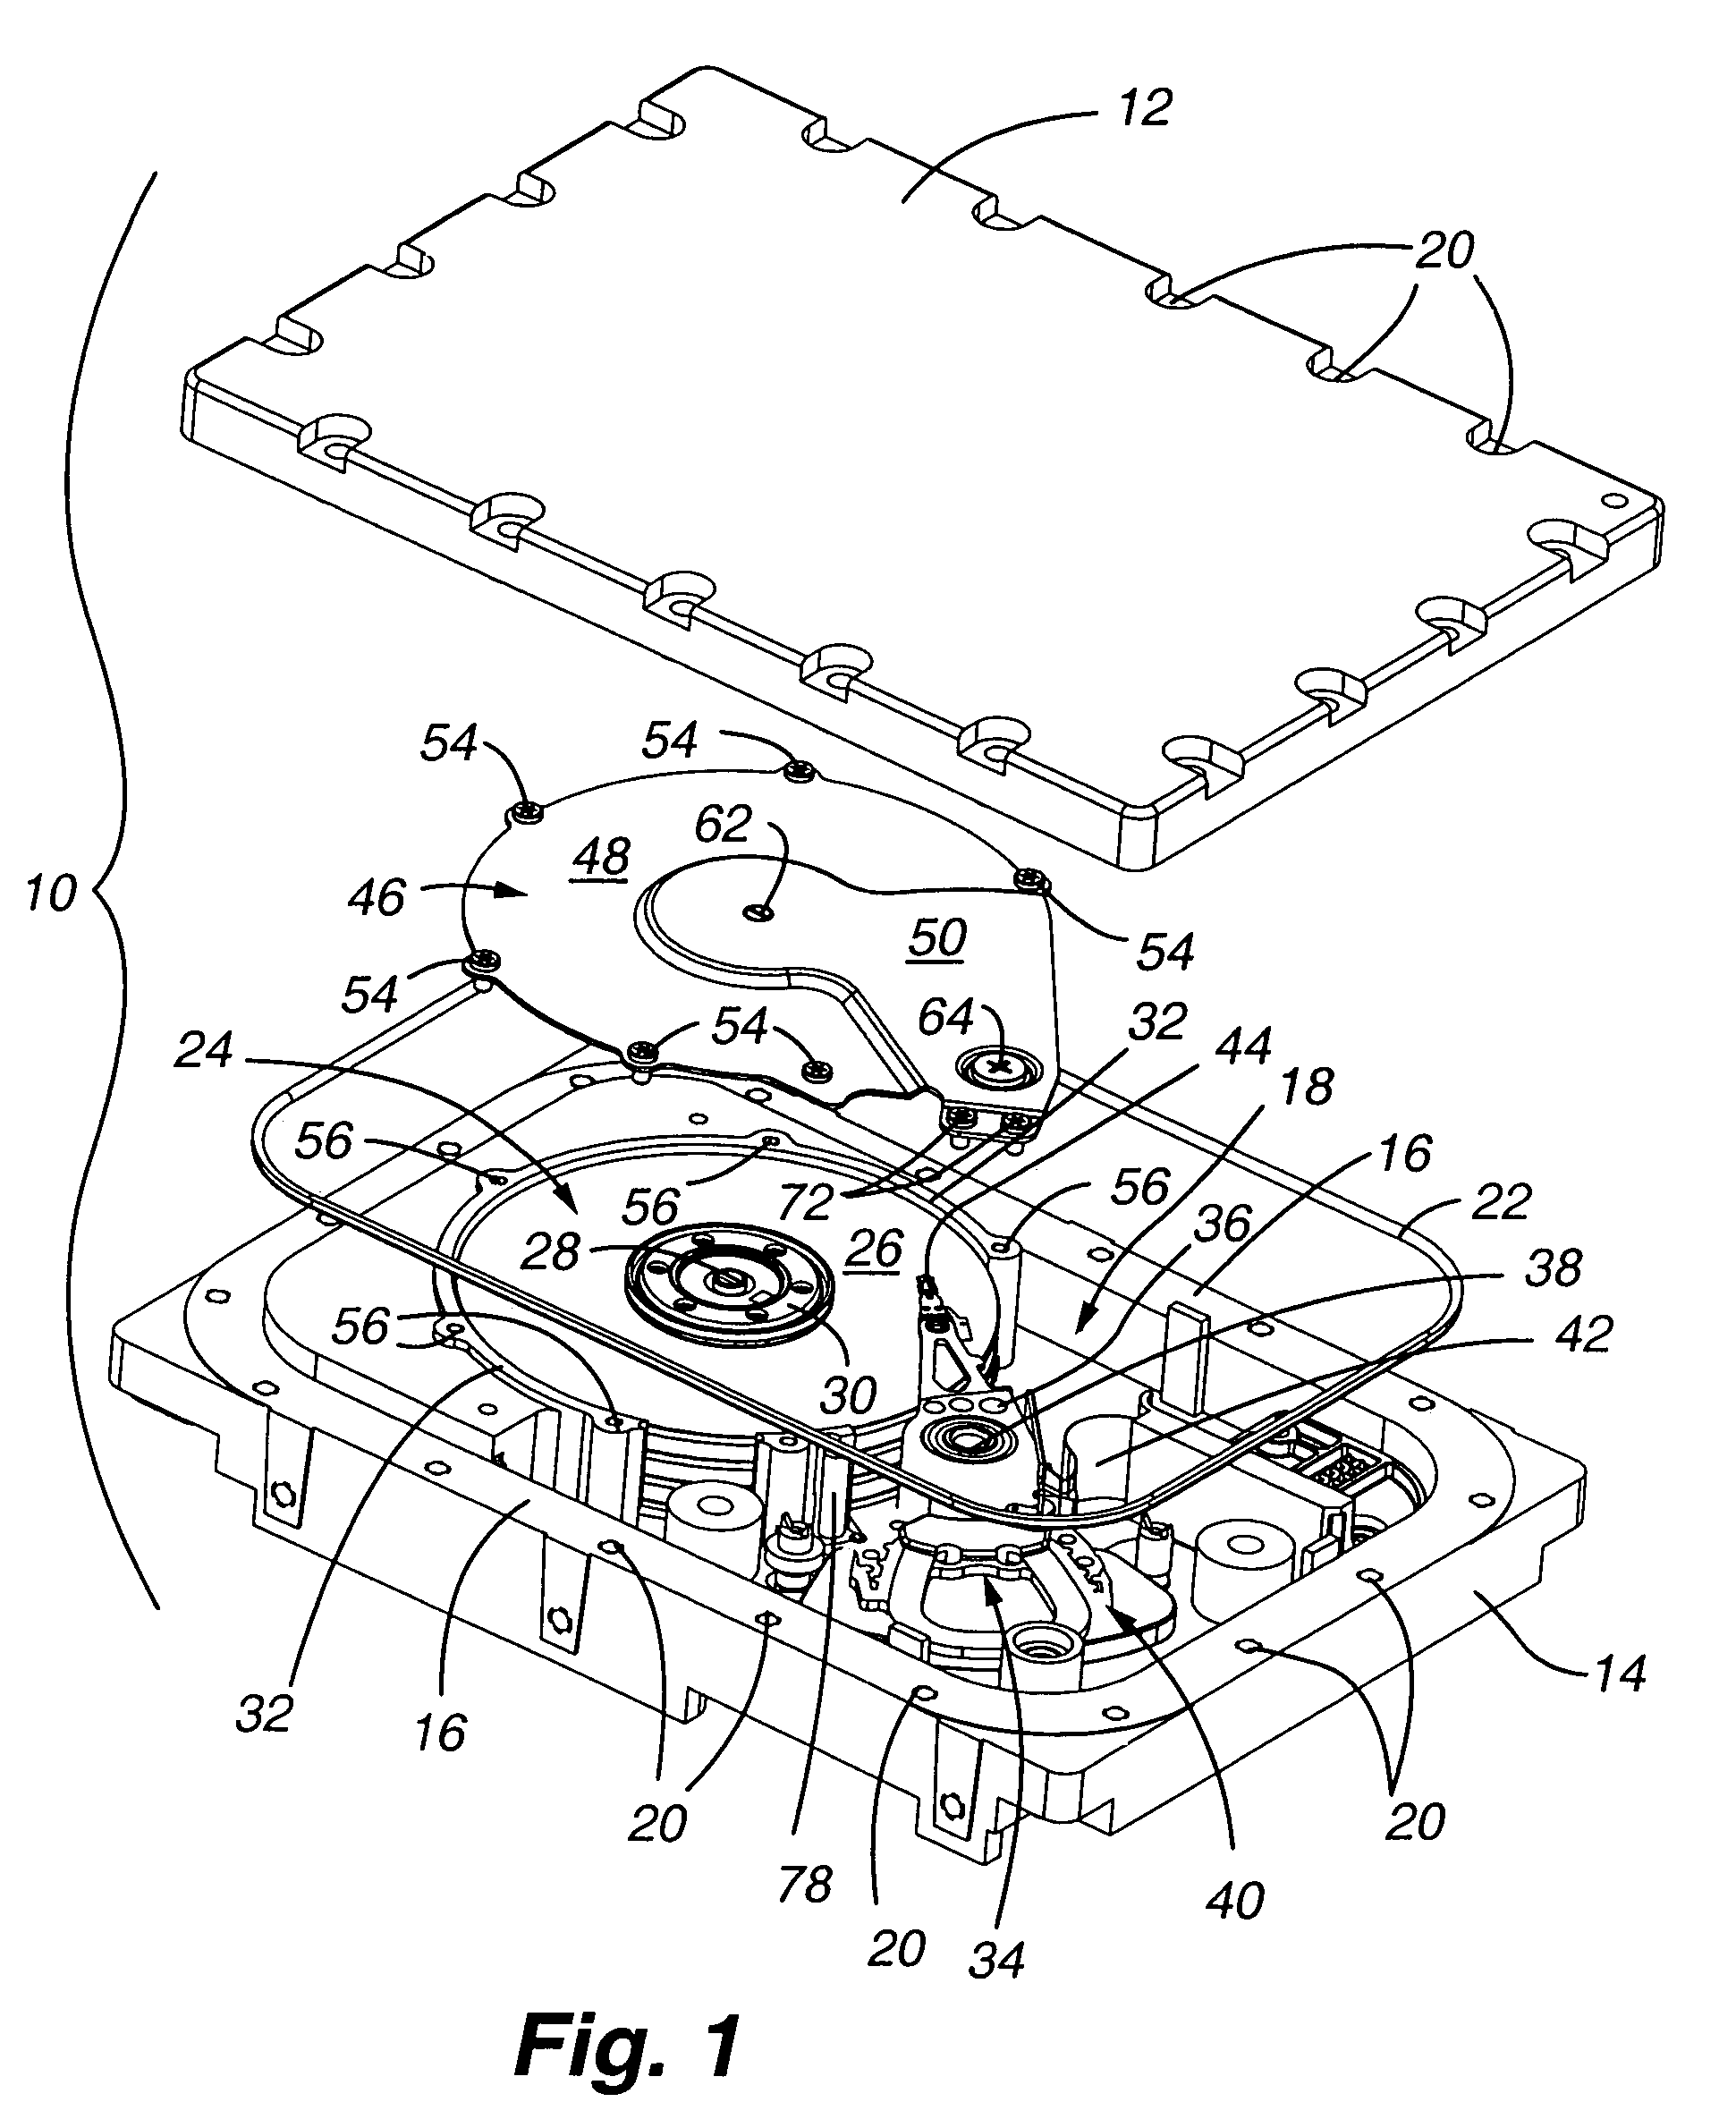 Hermetically sealed housing with interior capture plate